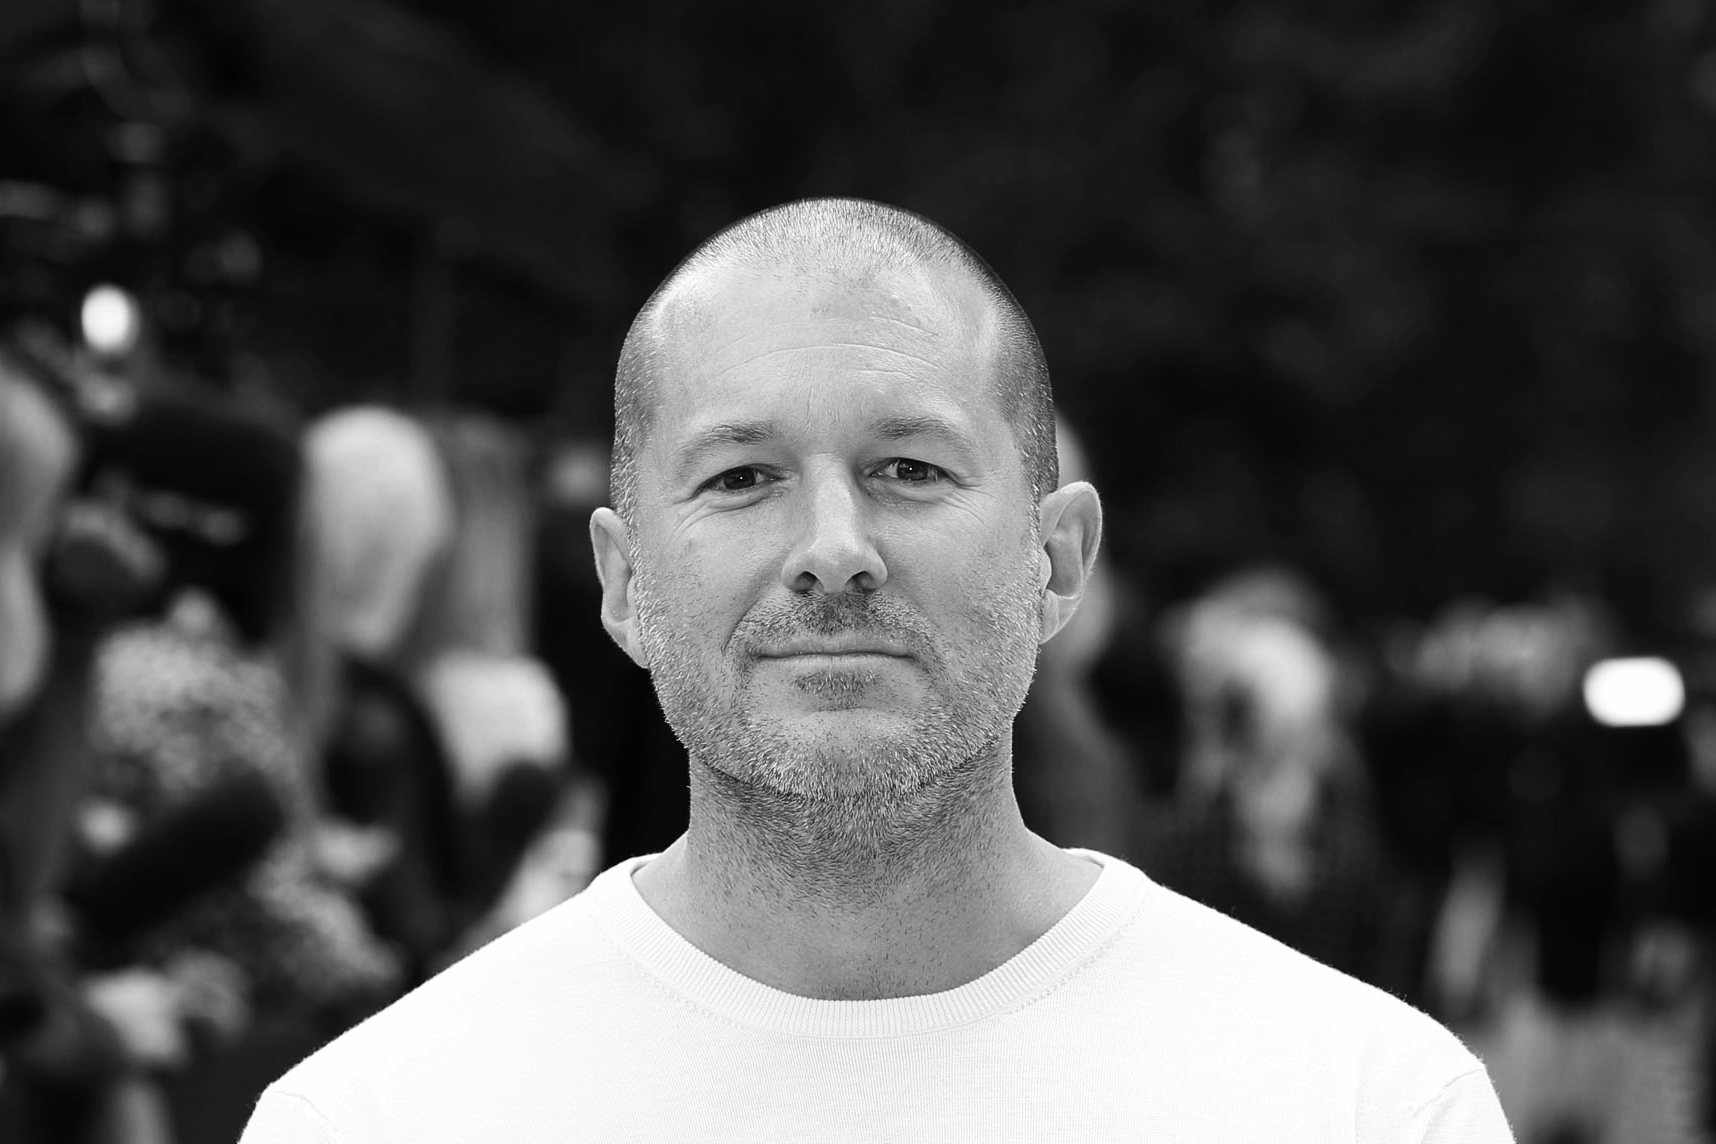 Jonathan Ive attends the front row for the Burberry Prorsum show on day 4 of London Fashion Week Spring/Summer 2013 on September 17, 2012 in London. (Mike Marsland—WireImage/Getty Images)